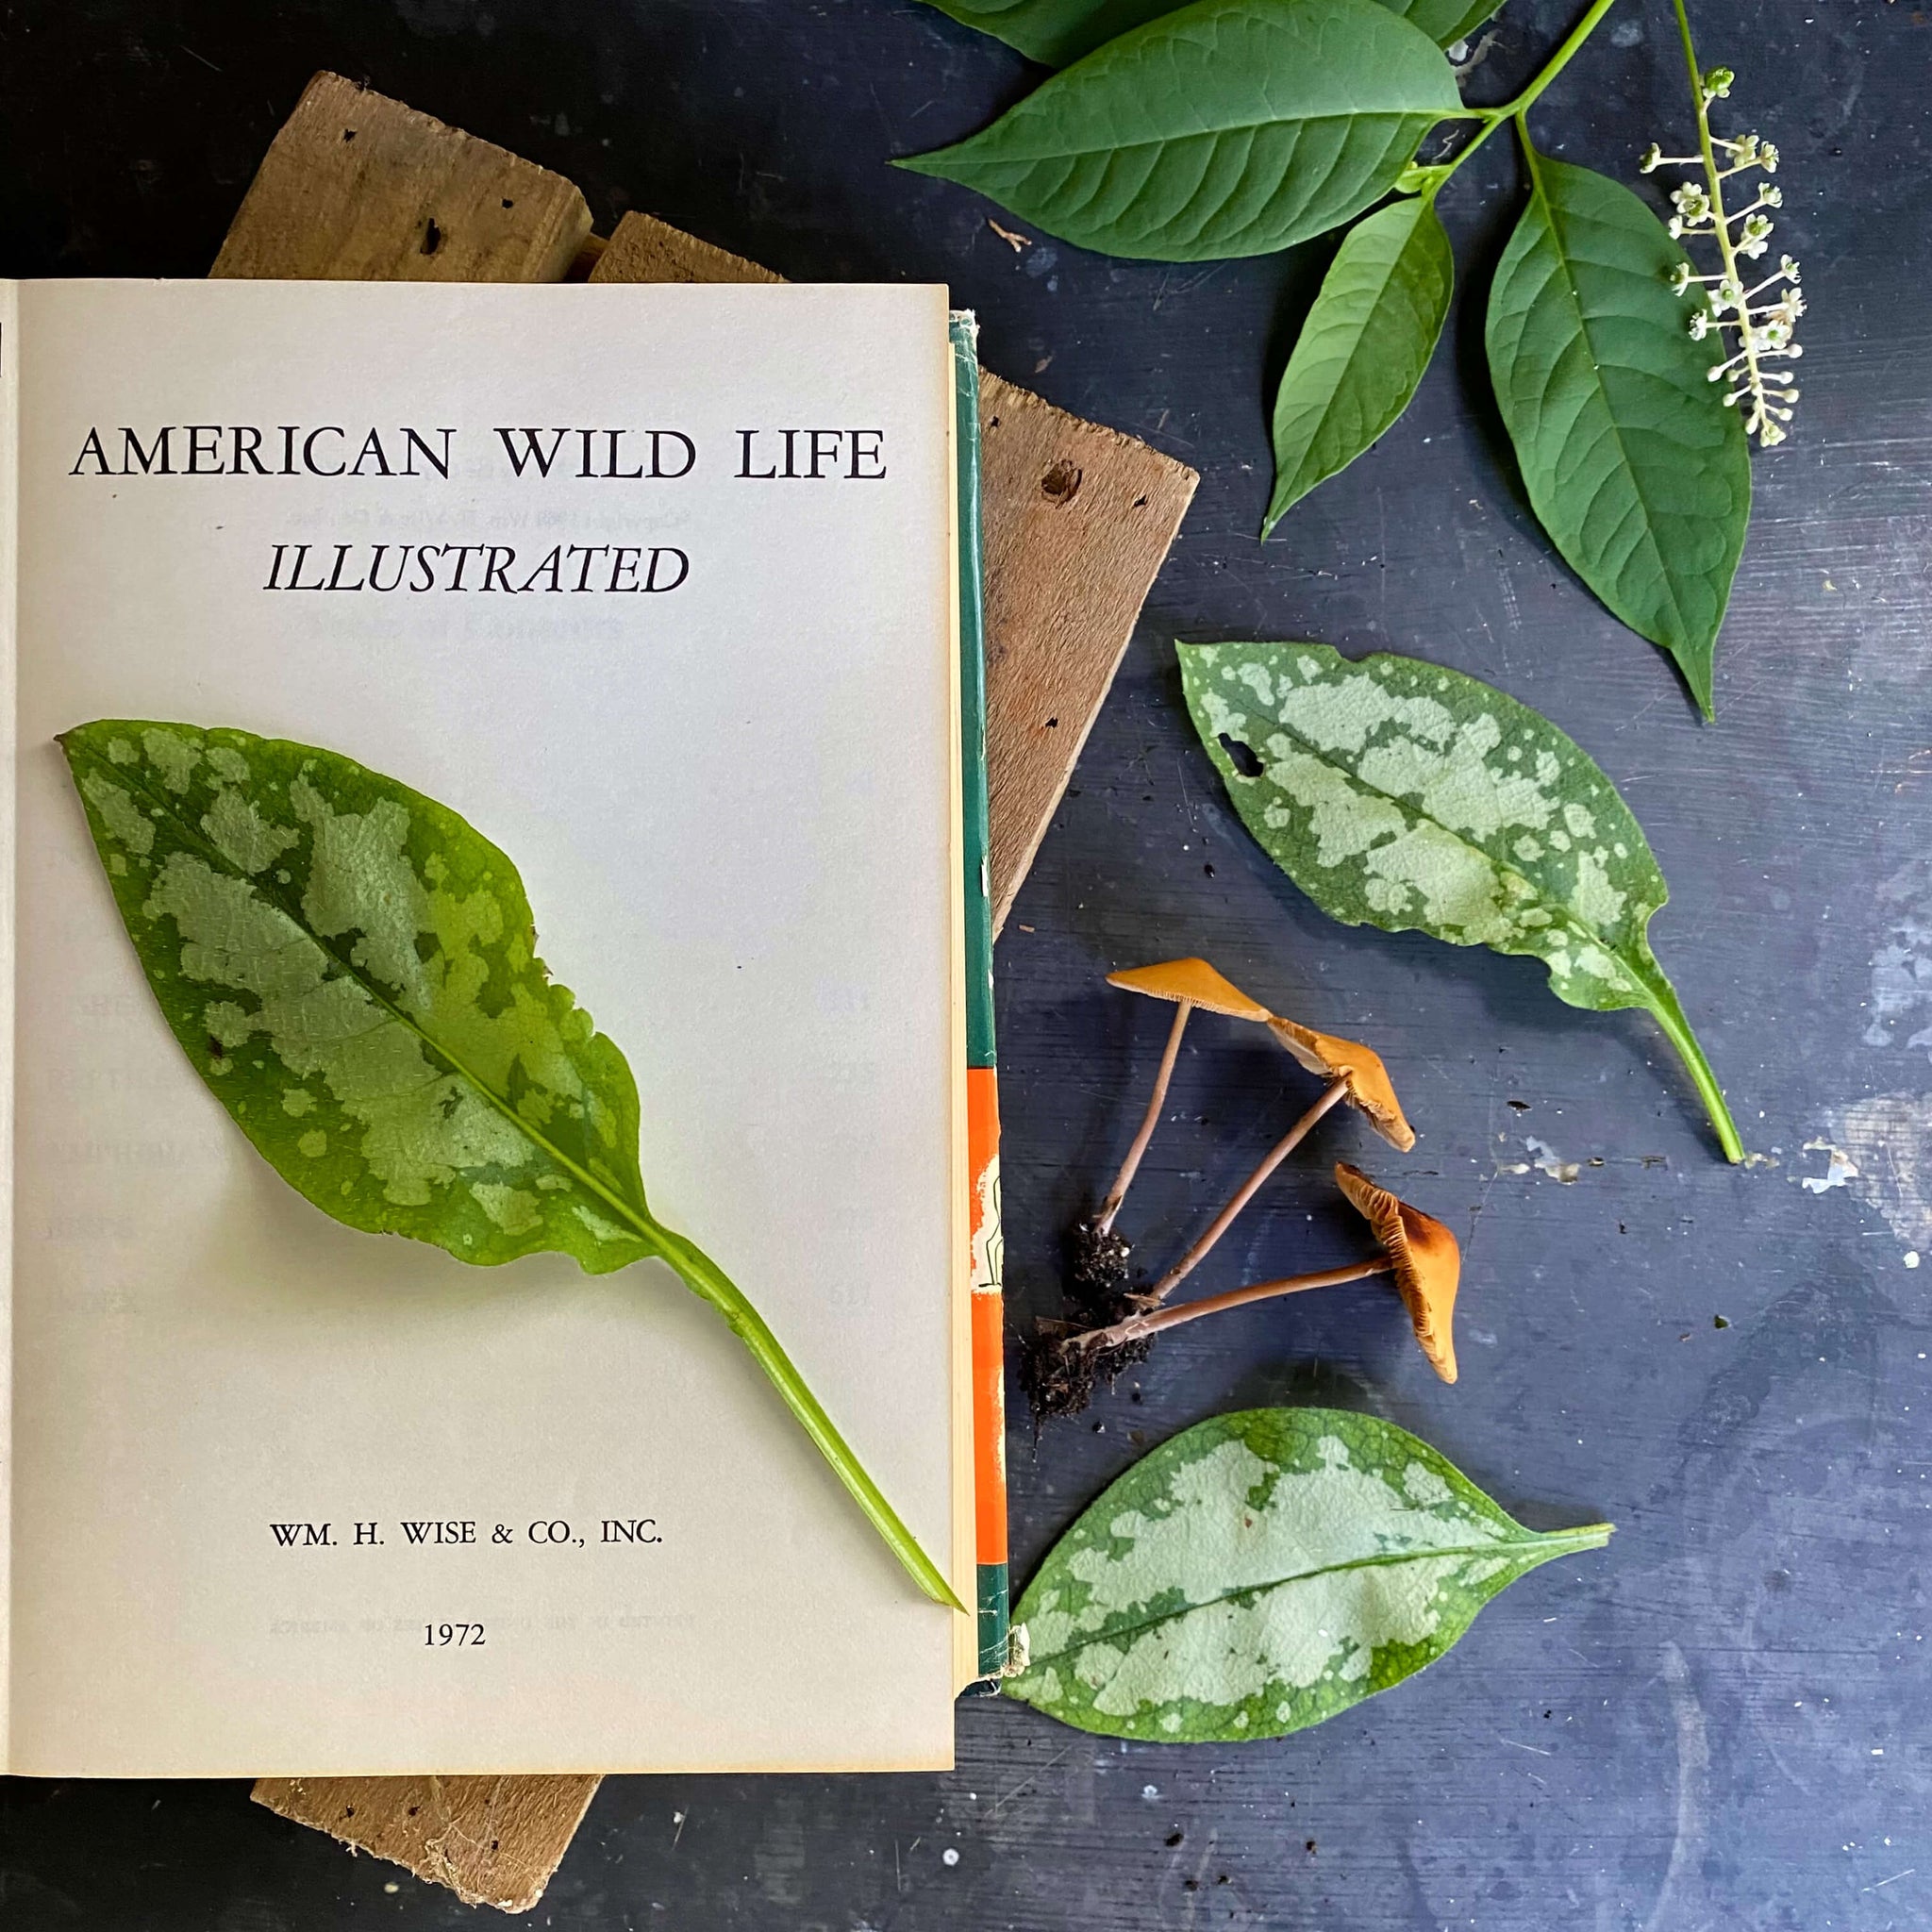 American Wild Life Illustrated - William H. Wise & Co. - 1972 Edition